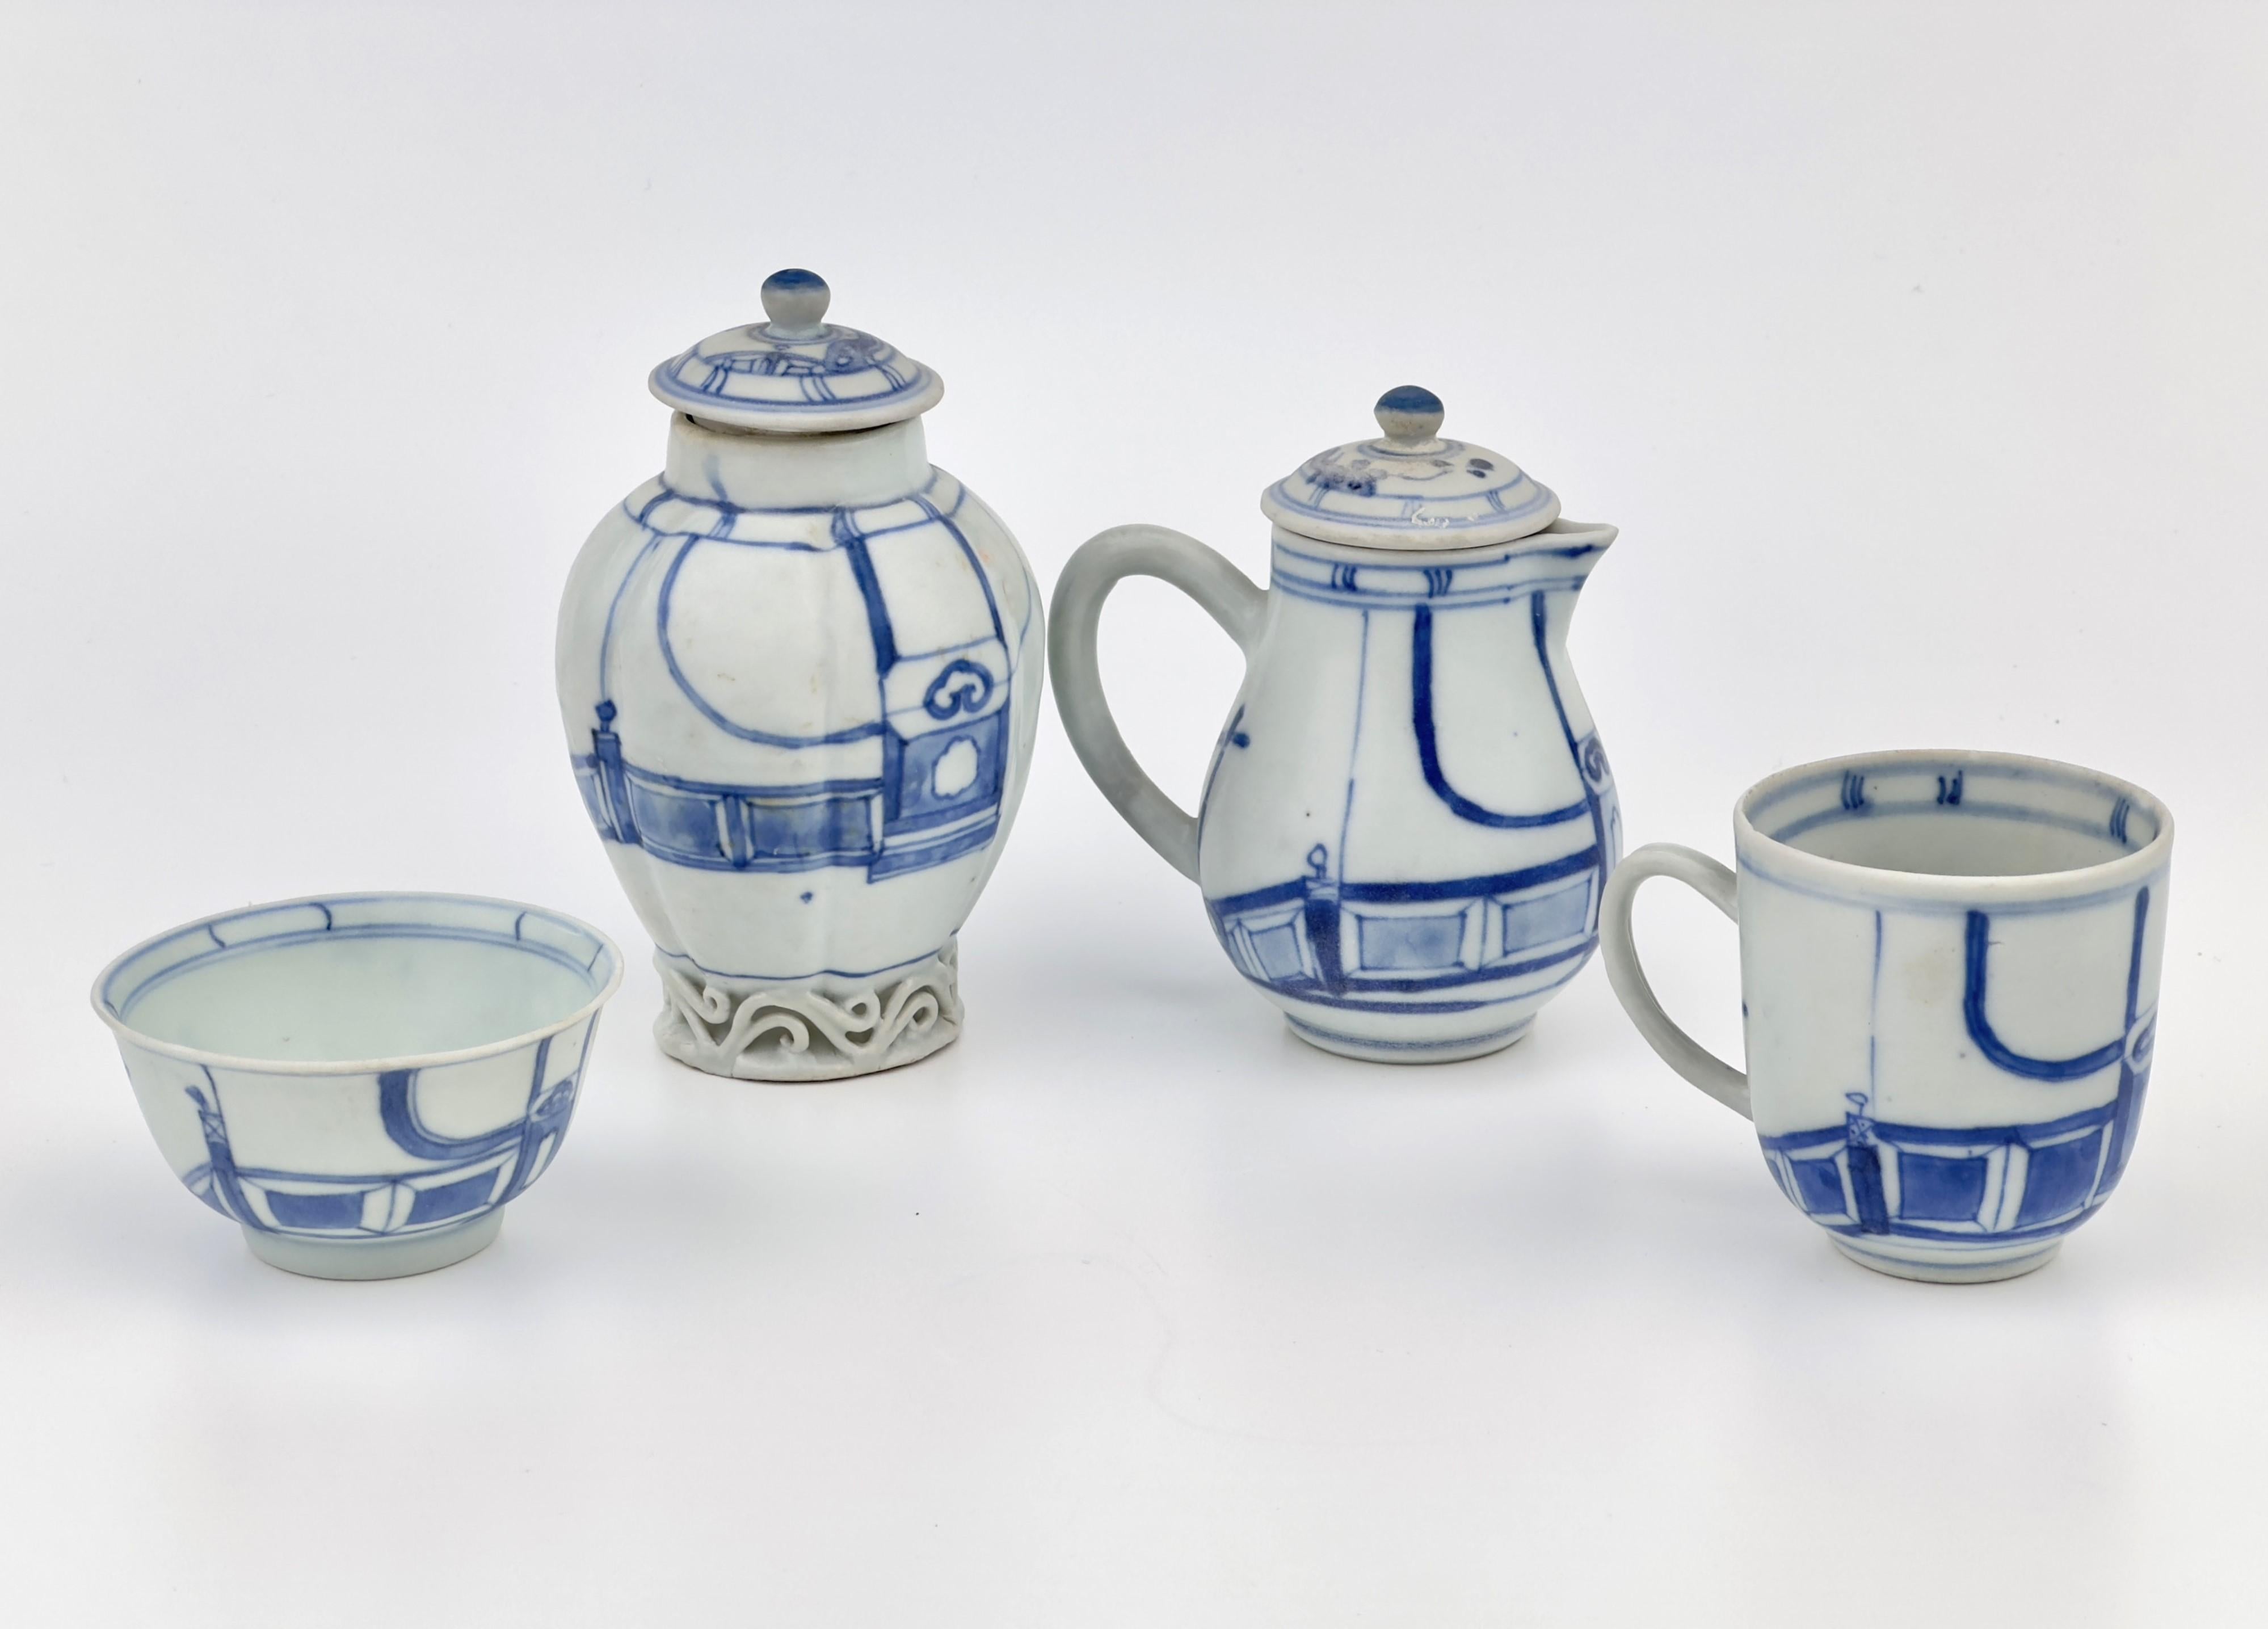 Chinese Export Imari Pavilion Pattern Blue and White Tea Set c 1725, Qing Dynasty, Yongzheng Re For Sale